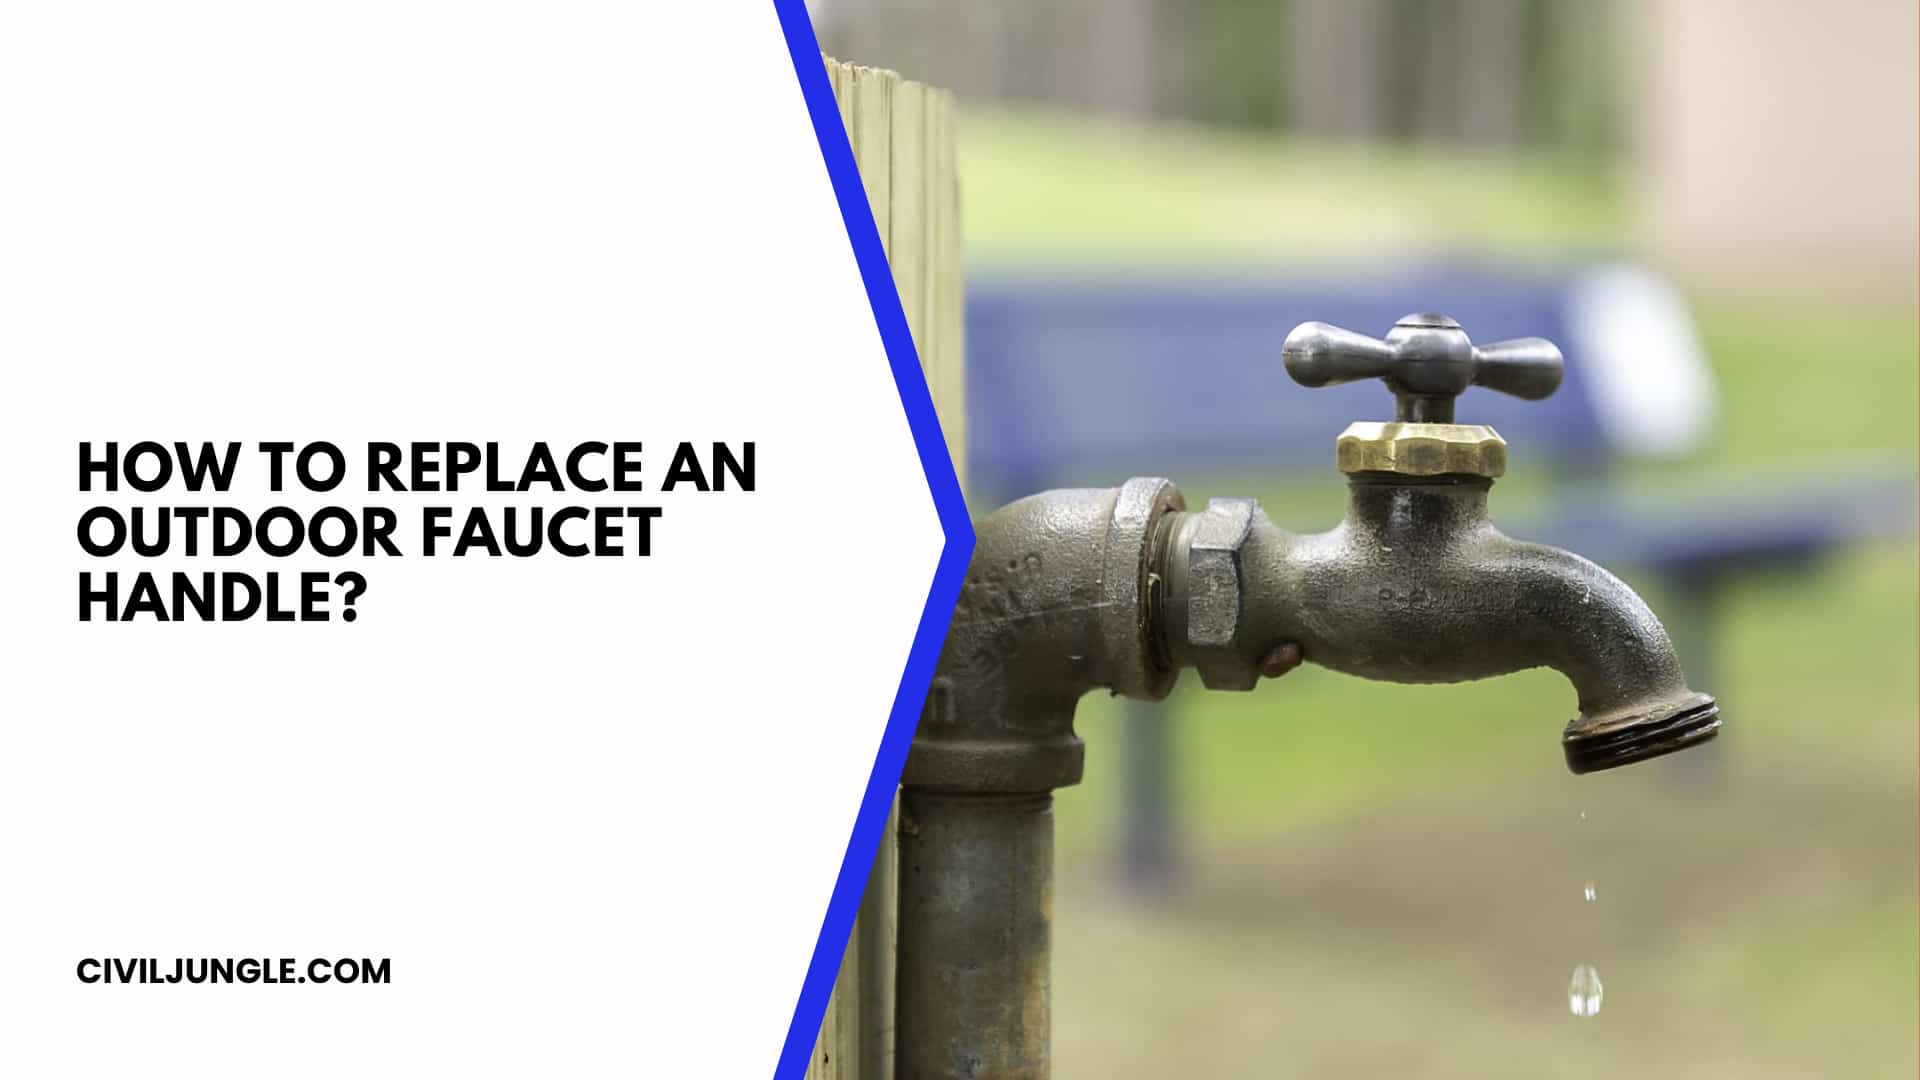 How to Replace an Outdoor Faucet Handle?